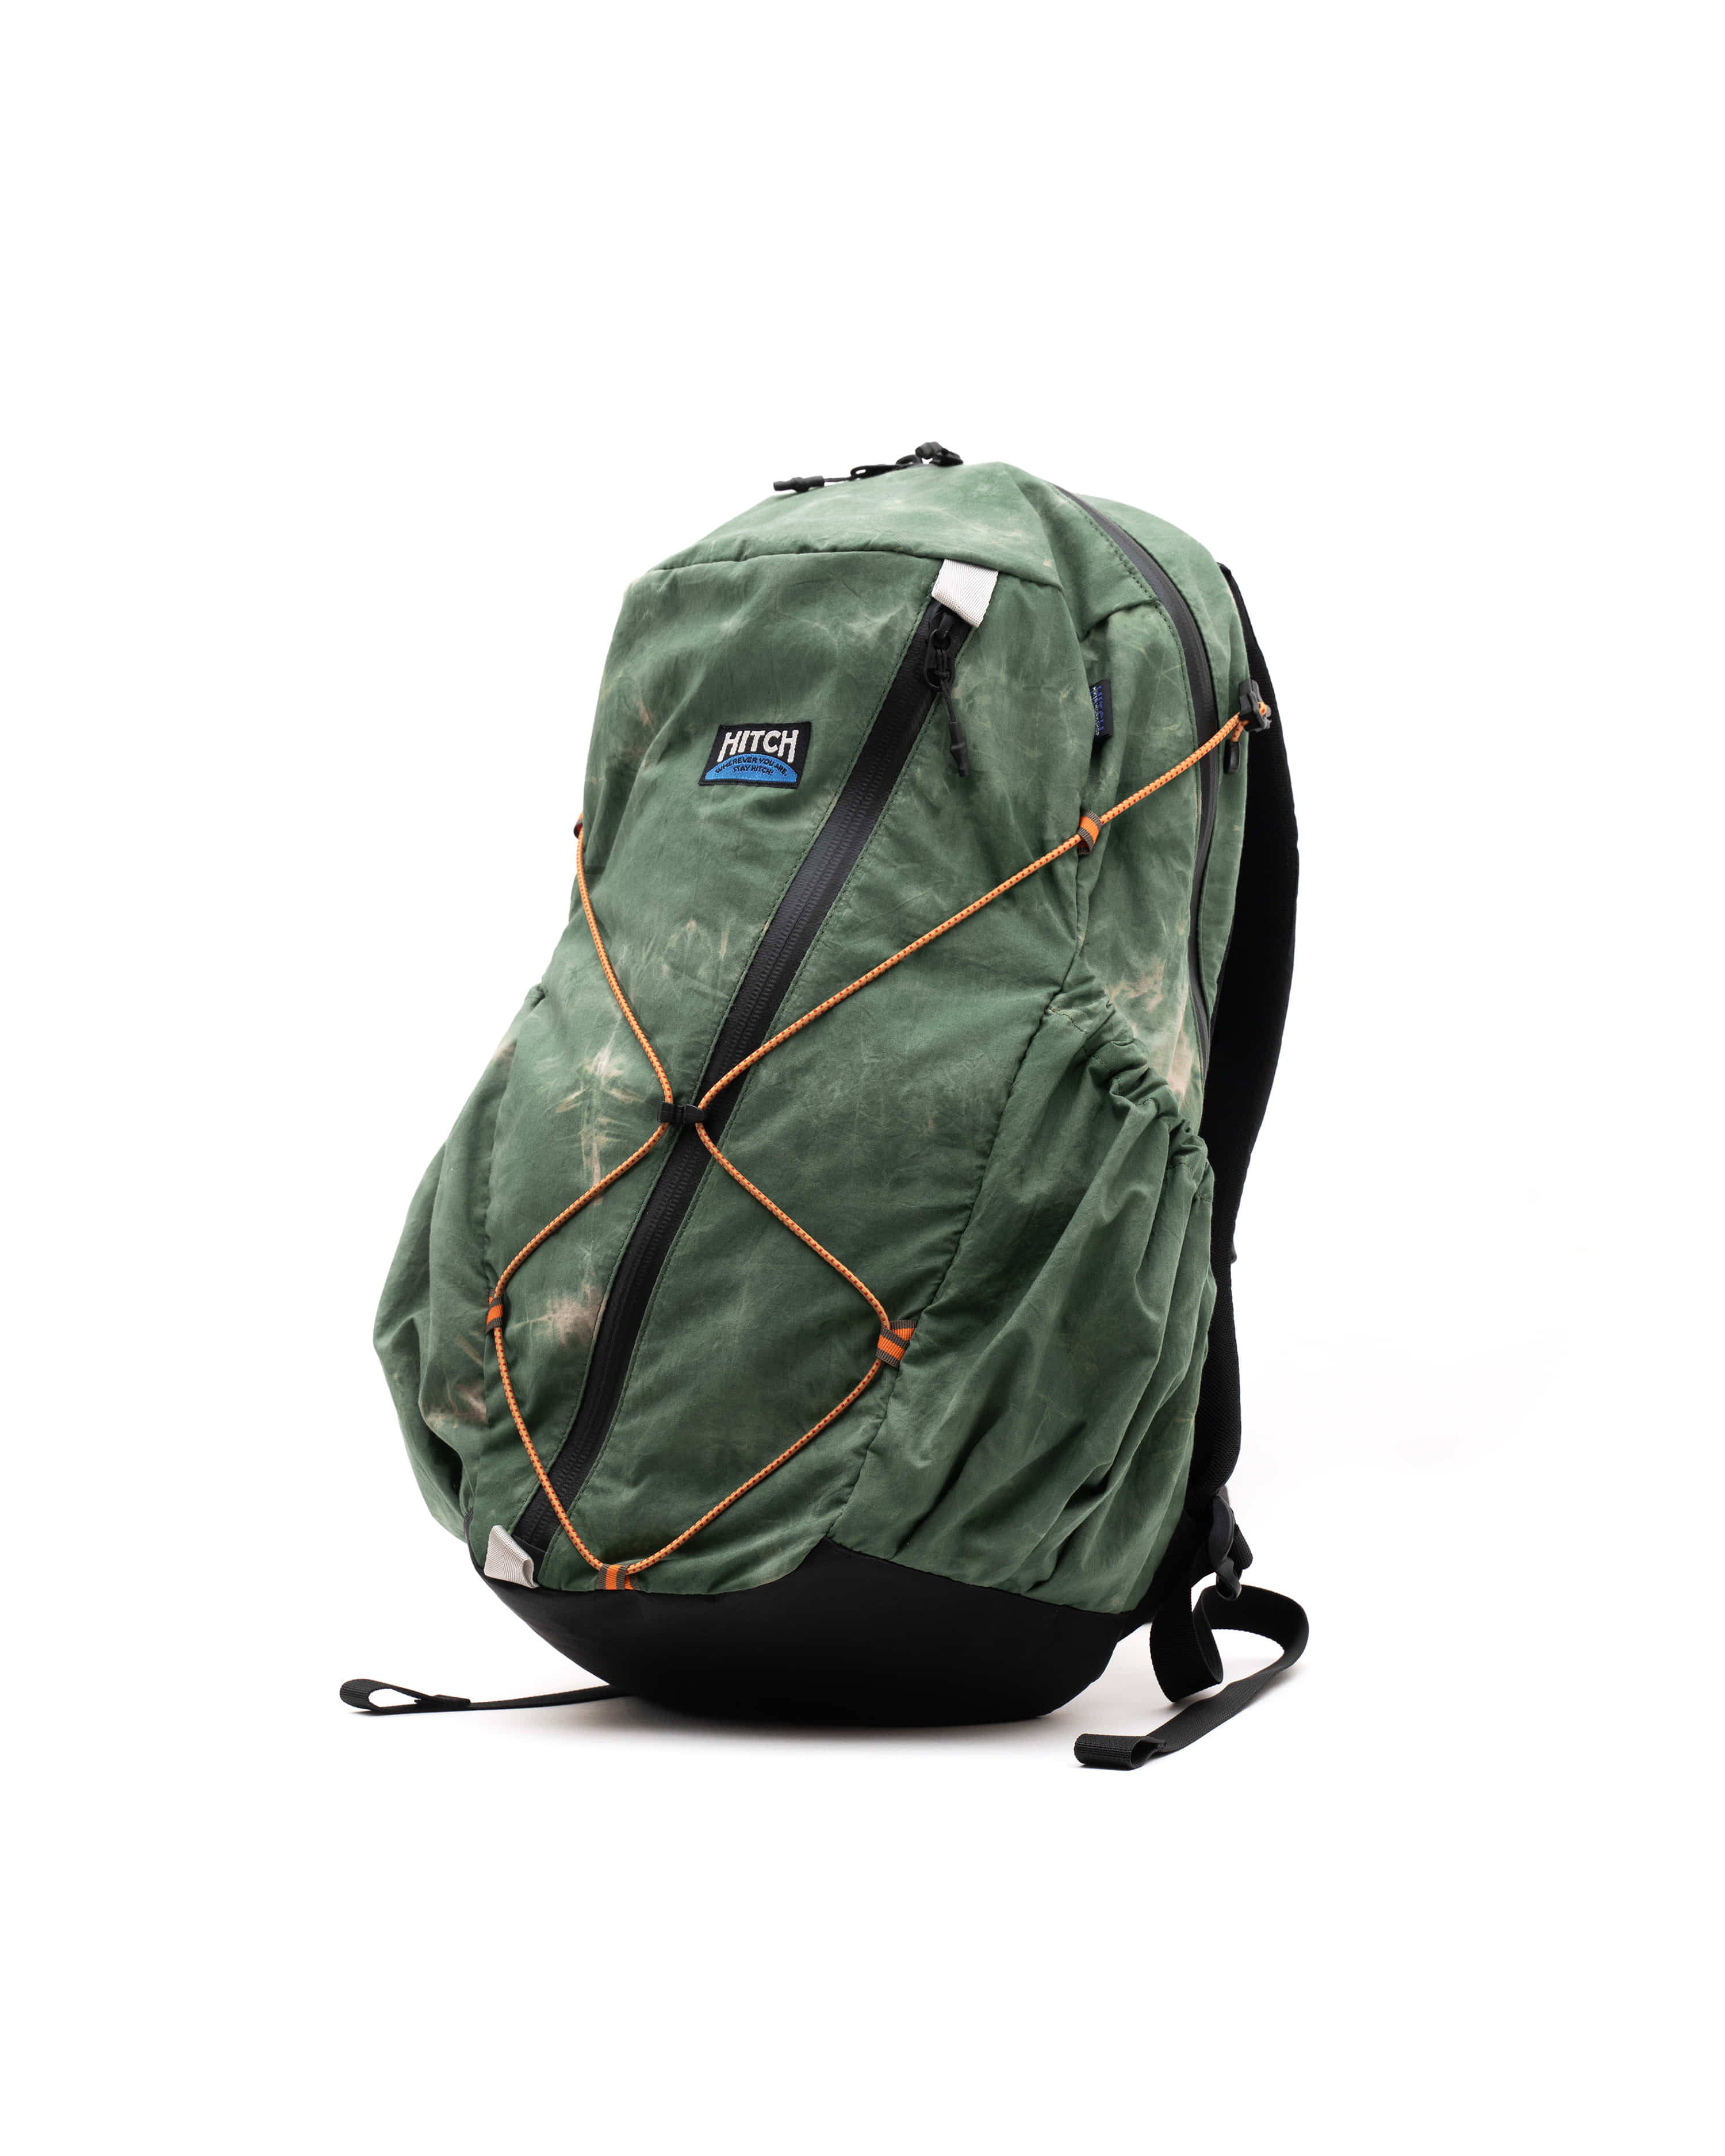 [out of stock] x HIKER WORKSHOP (TYPE-5 for Laptop) - Green Tie dye